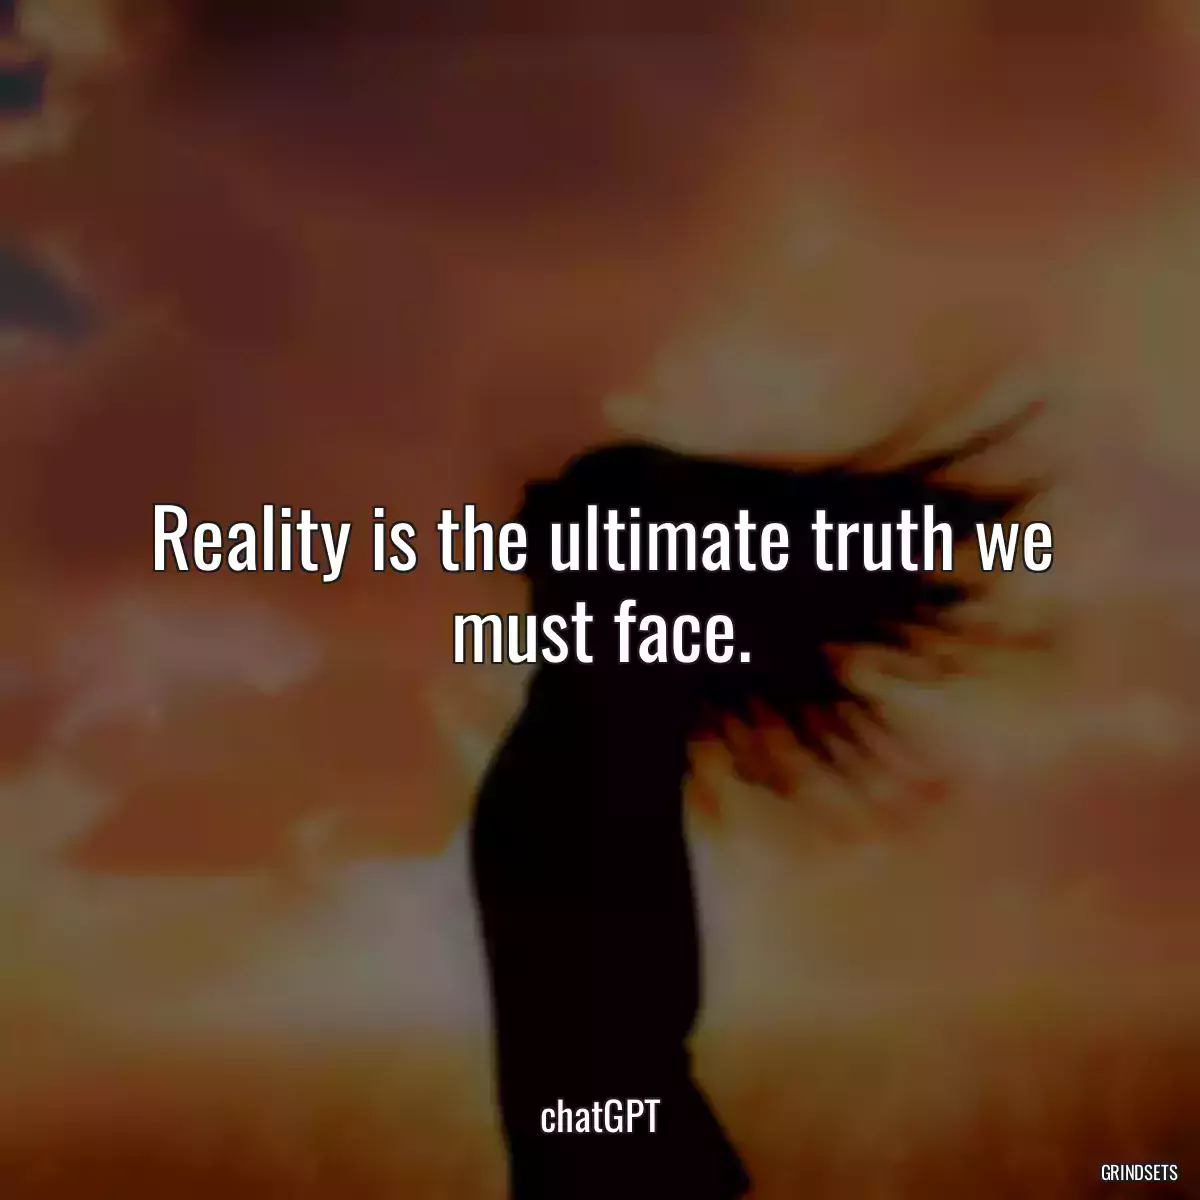 Reality is the ultimate truth we must face.